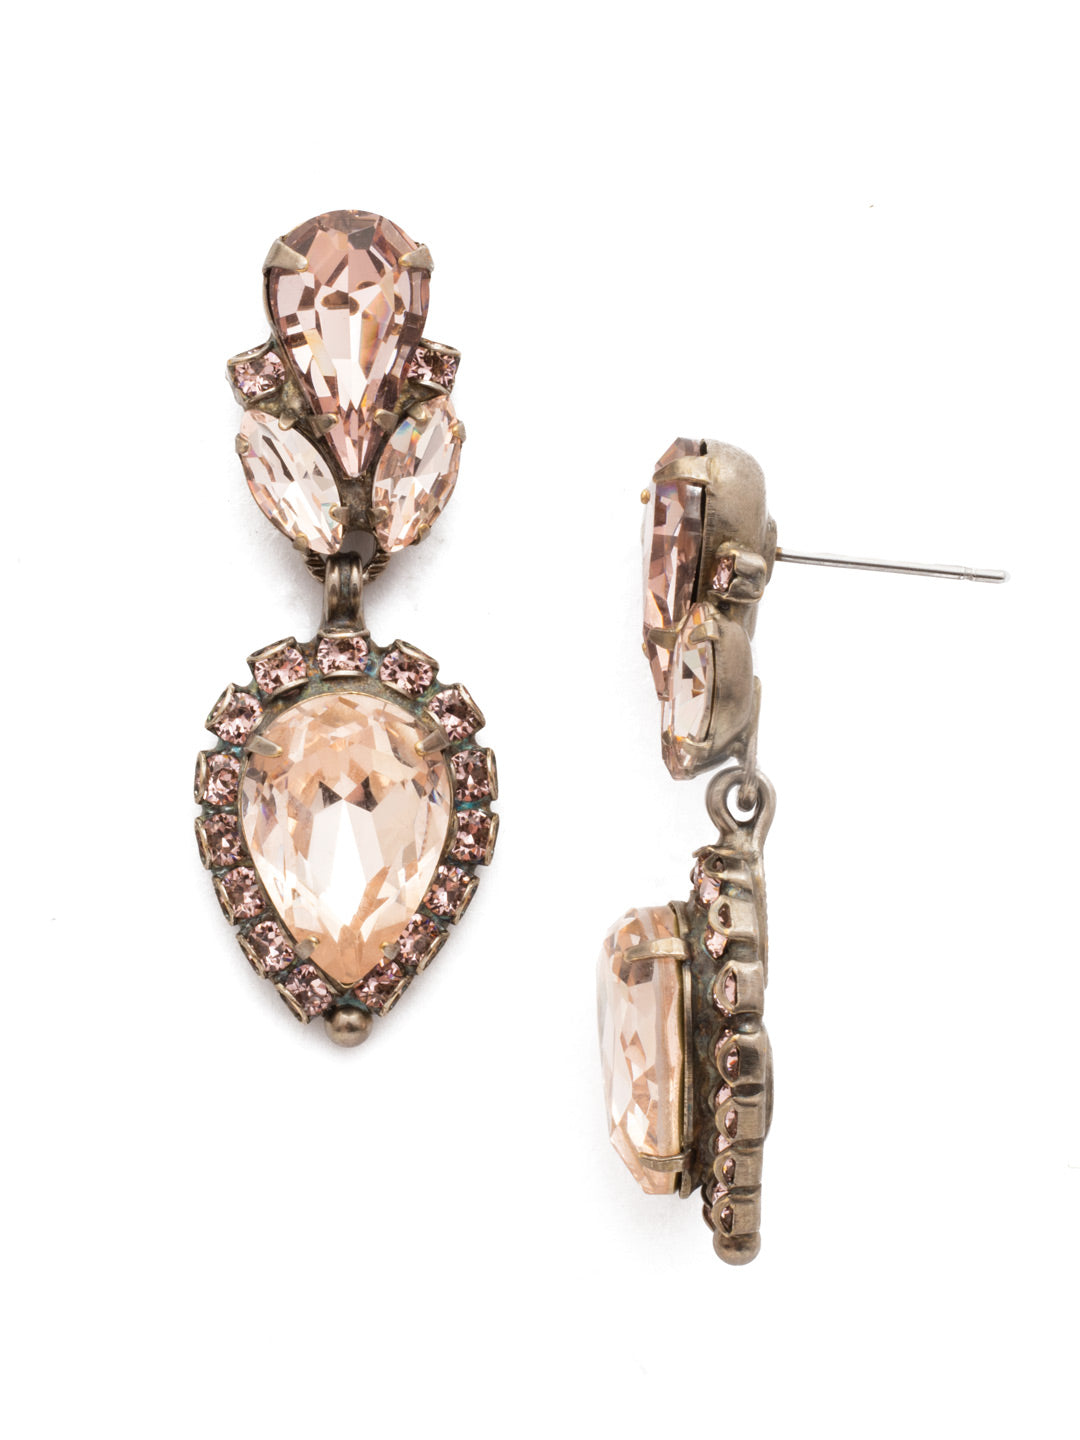 Sea Change Dangle Earrings - EDZ38ASSBL - <p>A cluster of crystals anchors this teardrop crystal in a stunning antique finish perfect to add a bit of sparkle to your look. From Sorrelli's Satin Blush collection in our Antique Silver-tone finish.</p>